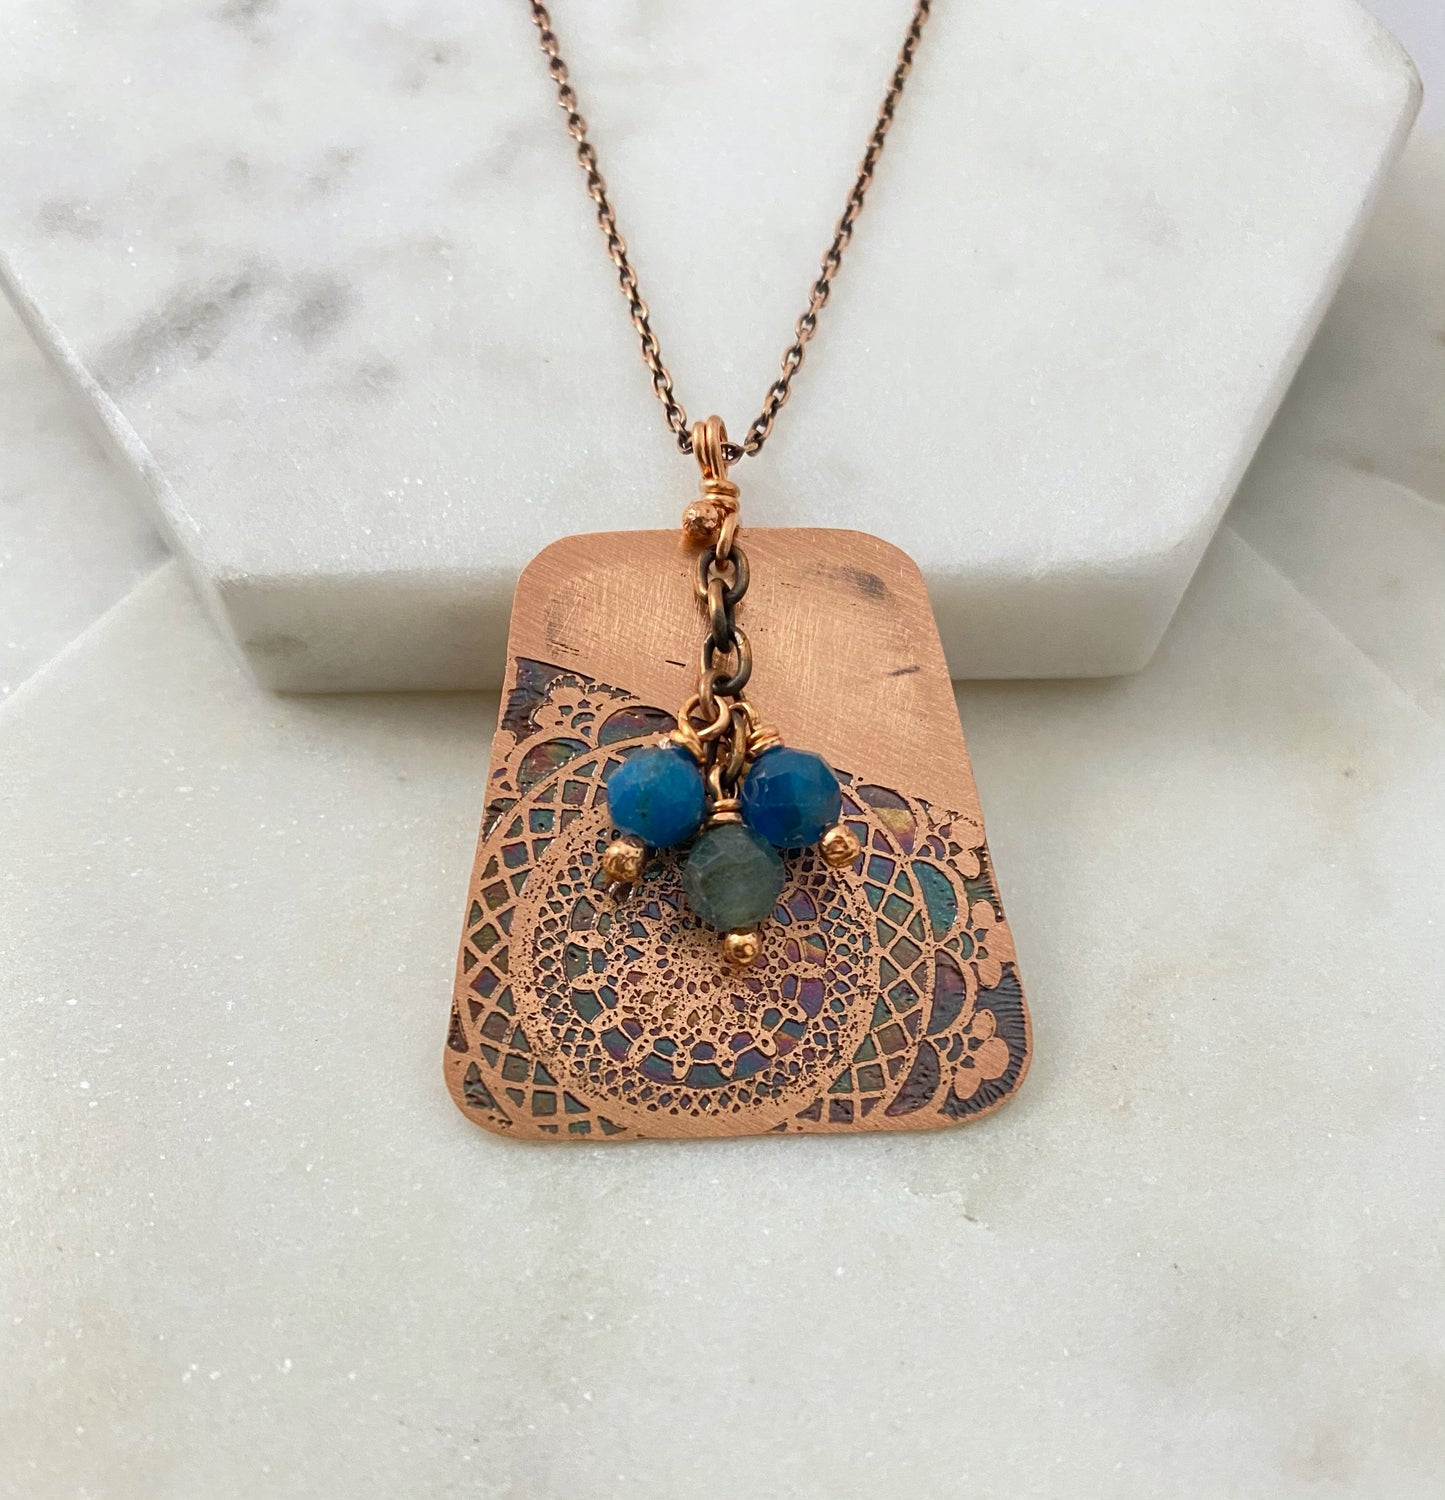 Apatite gemstone and copper necklace